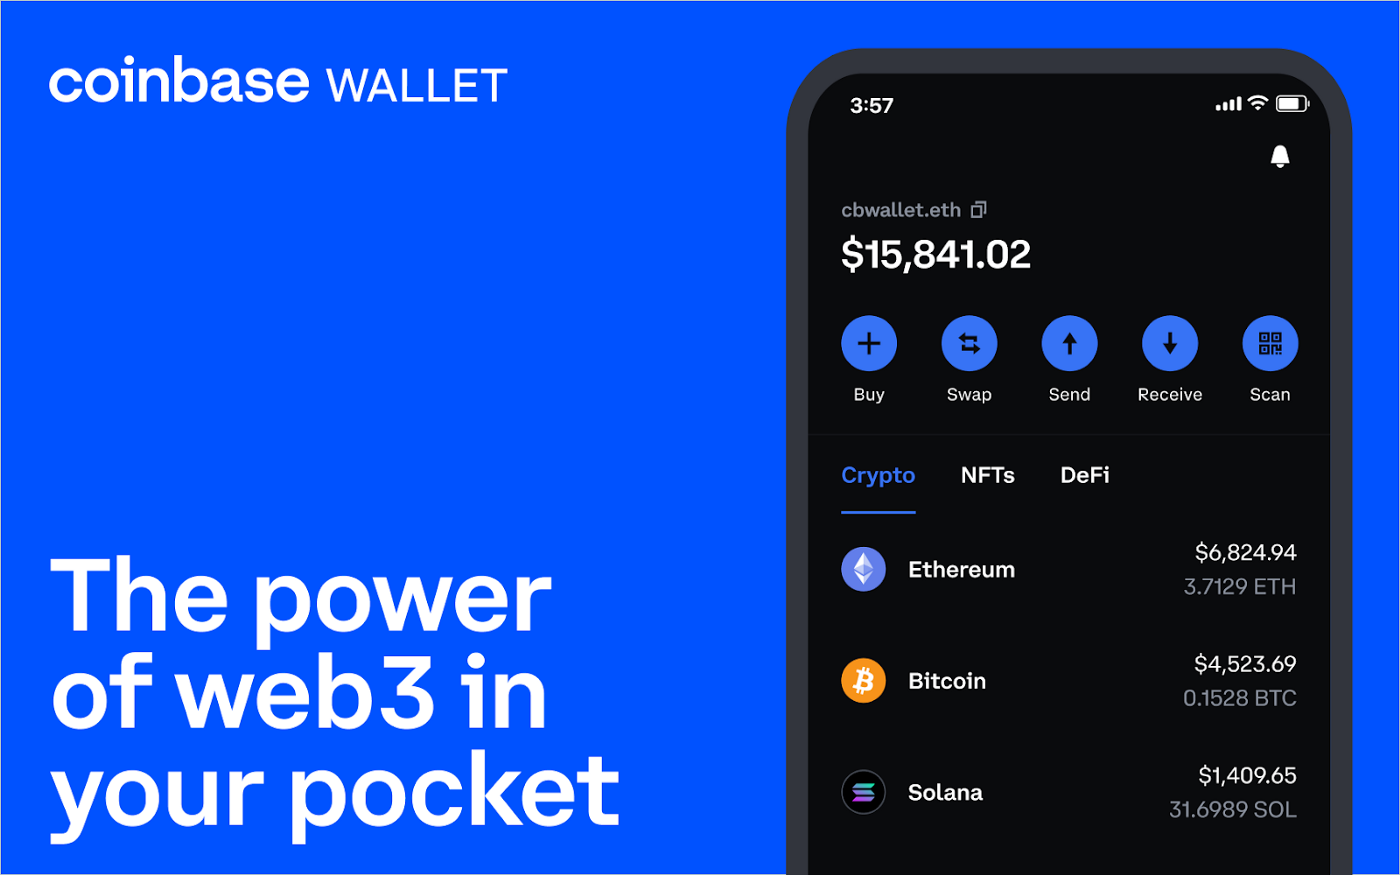 Making web3 more accessible and intuitive — meet the new Coinbase Wallet mobile app - The power of web3 in your pocket